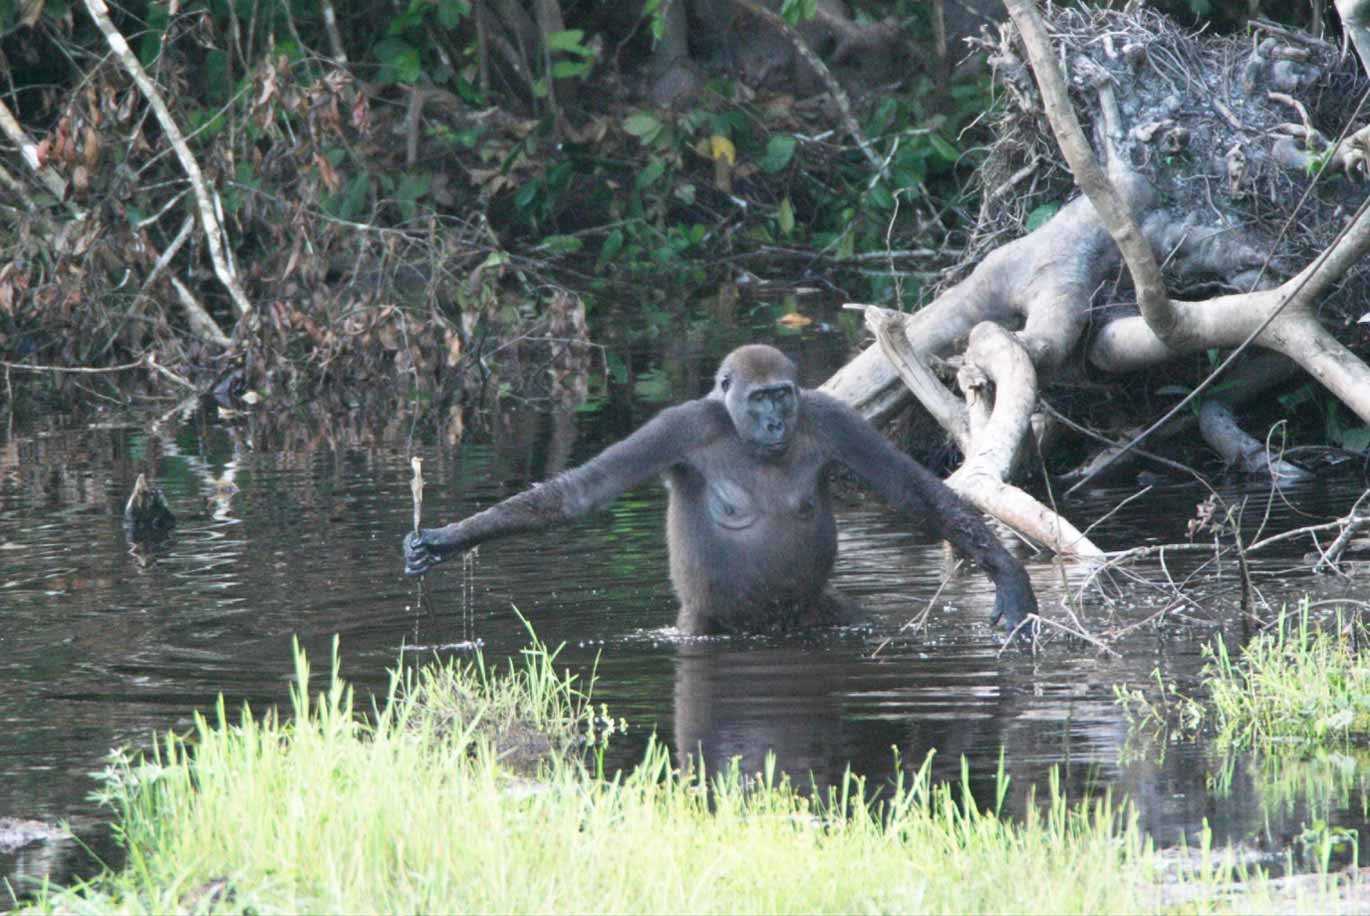 A female gorilla shown from the waist up standing in a pool of water with trees in background.